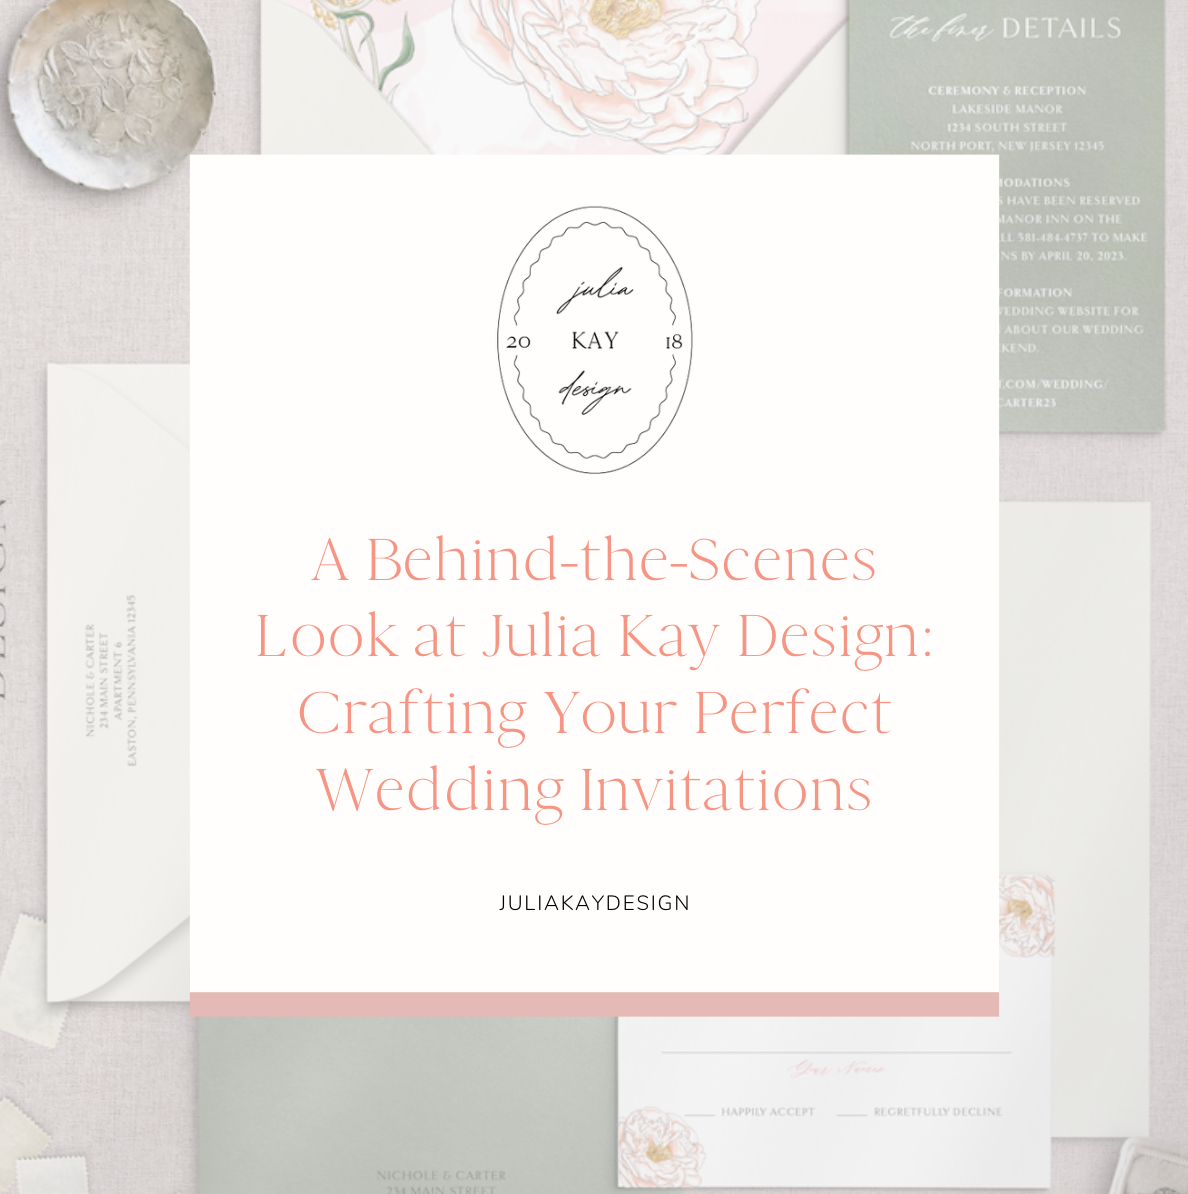 A Behind-the-Scenes Look at Julia Kay Design: Crafting Your Perfect Wedding Invitations